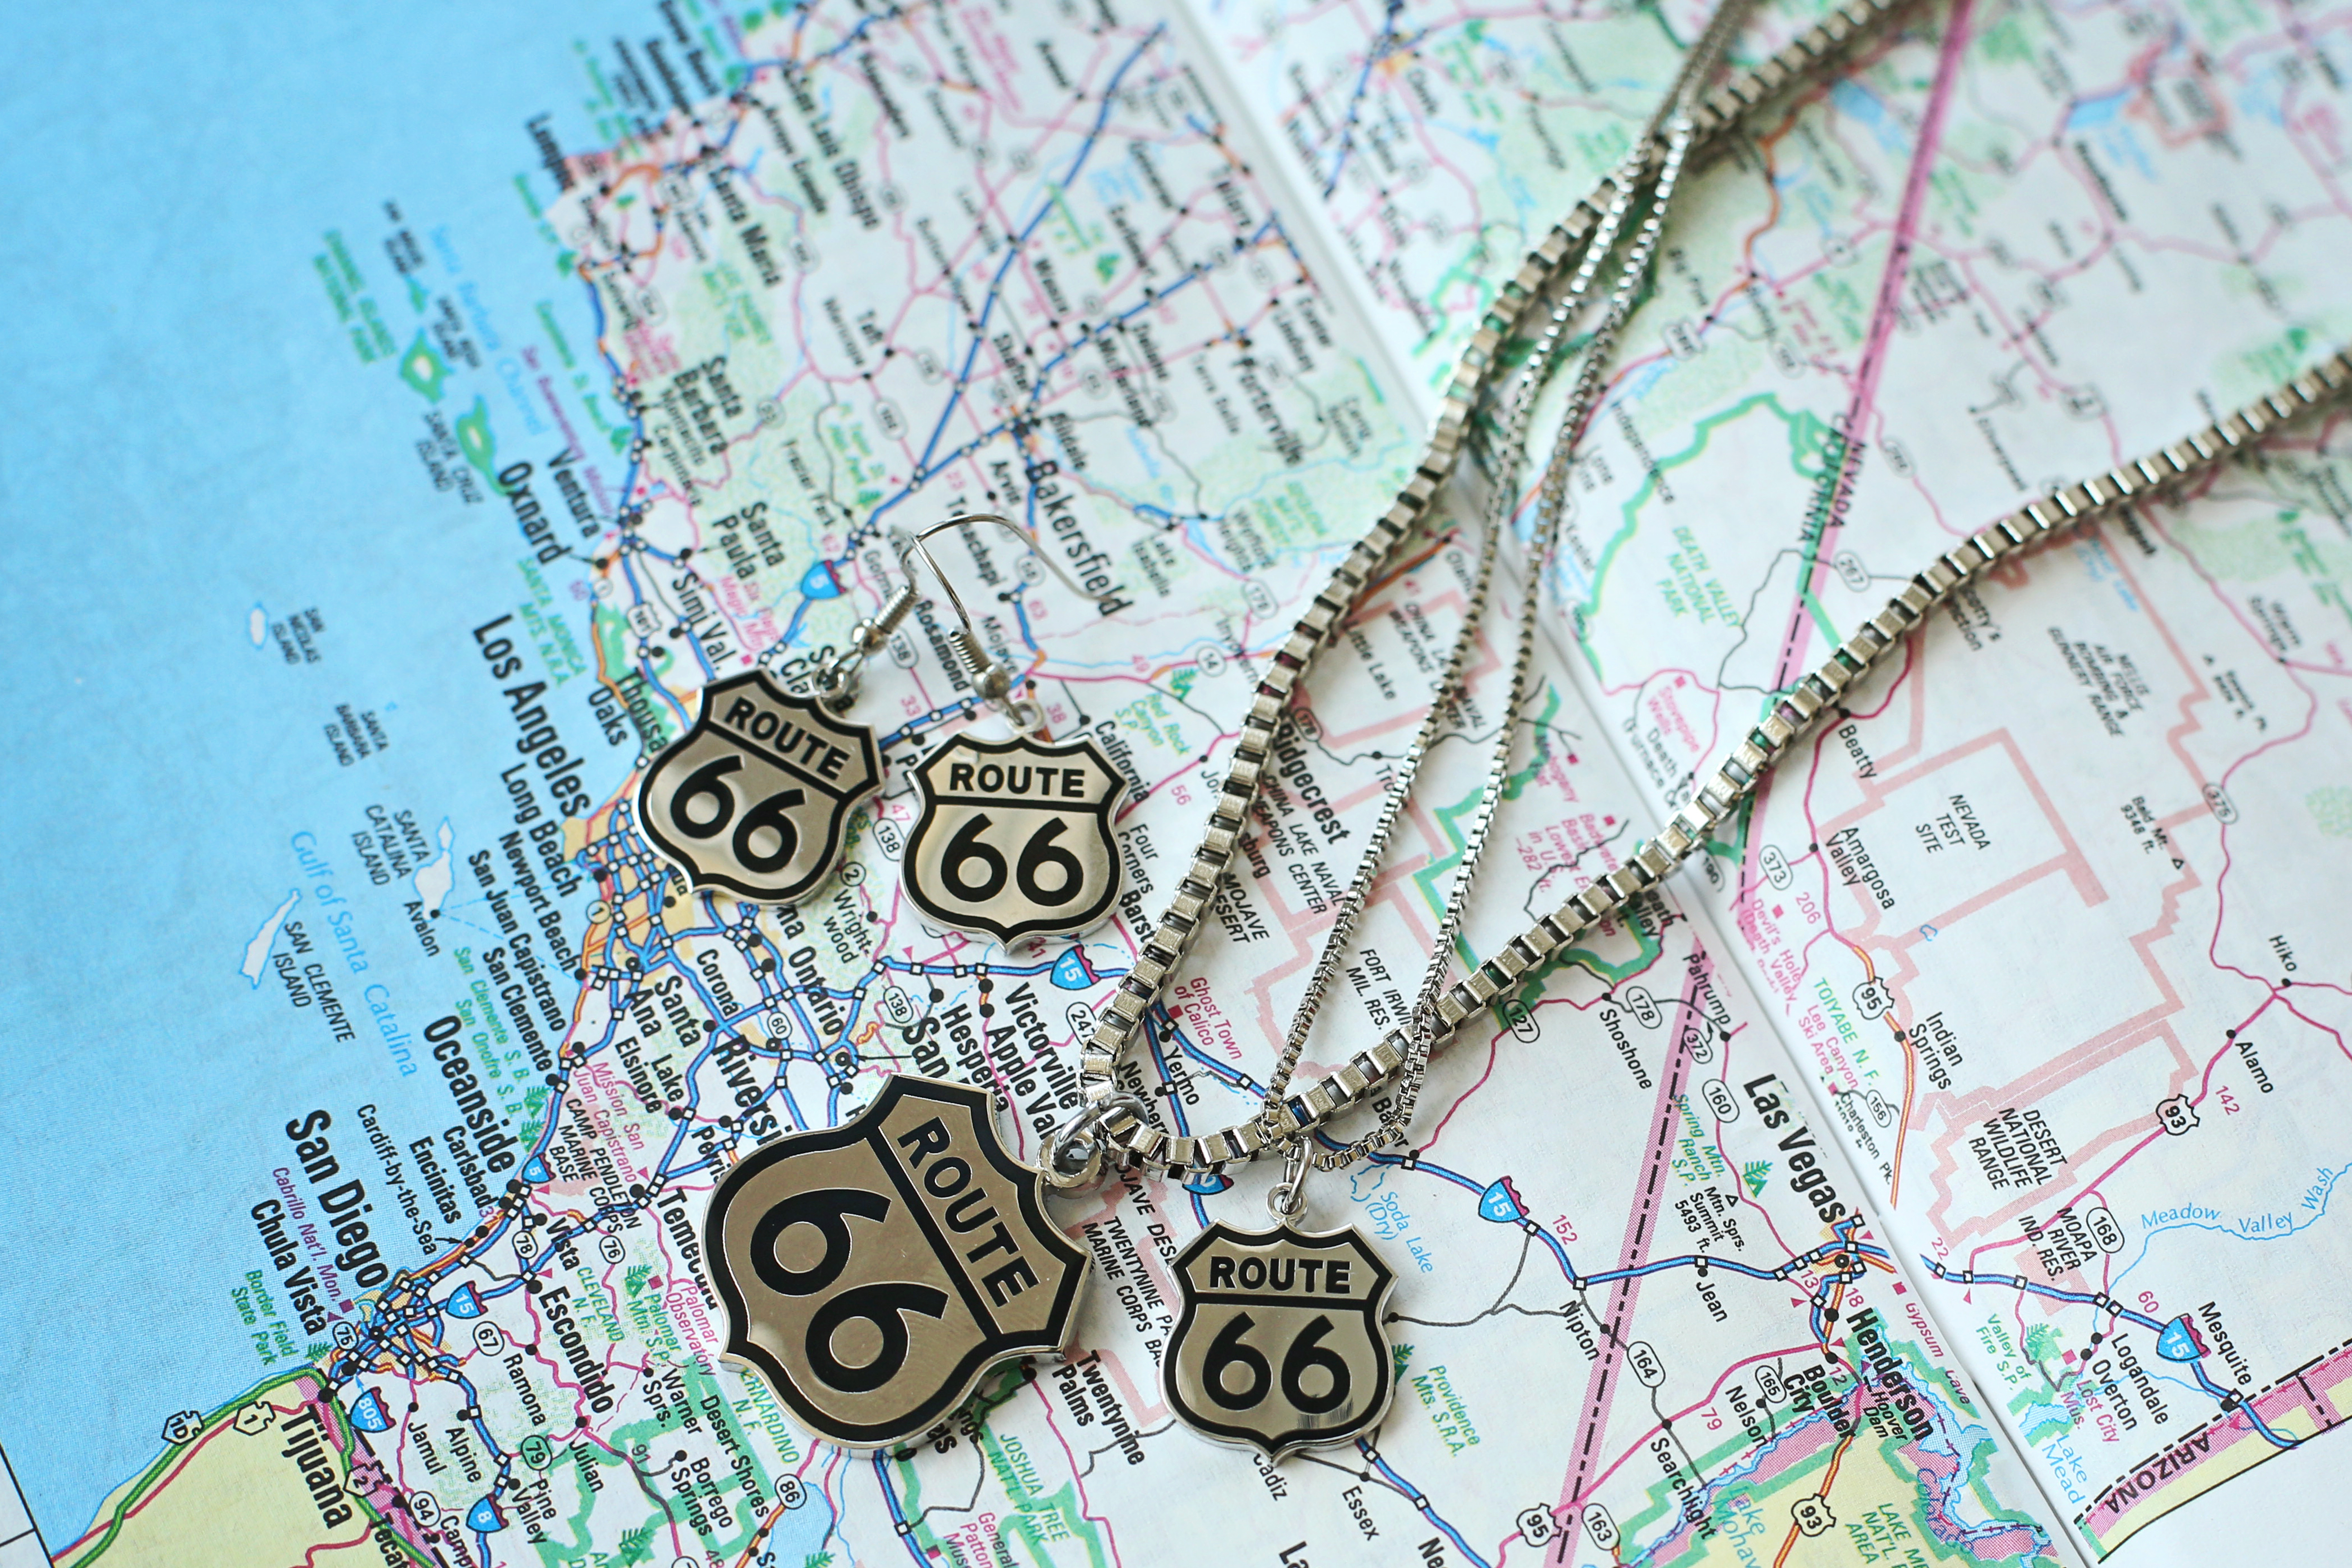 Historic Route 66 Weathered Road Sign Pendants Americana Pendant Necklace USA ROUTE 66 Road Pendant Necklace Biker Jewelry